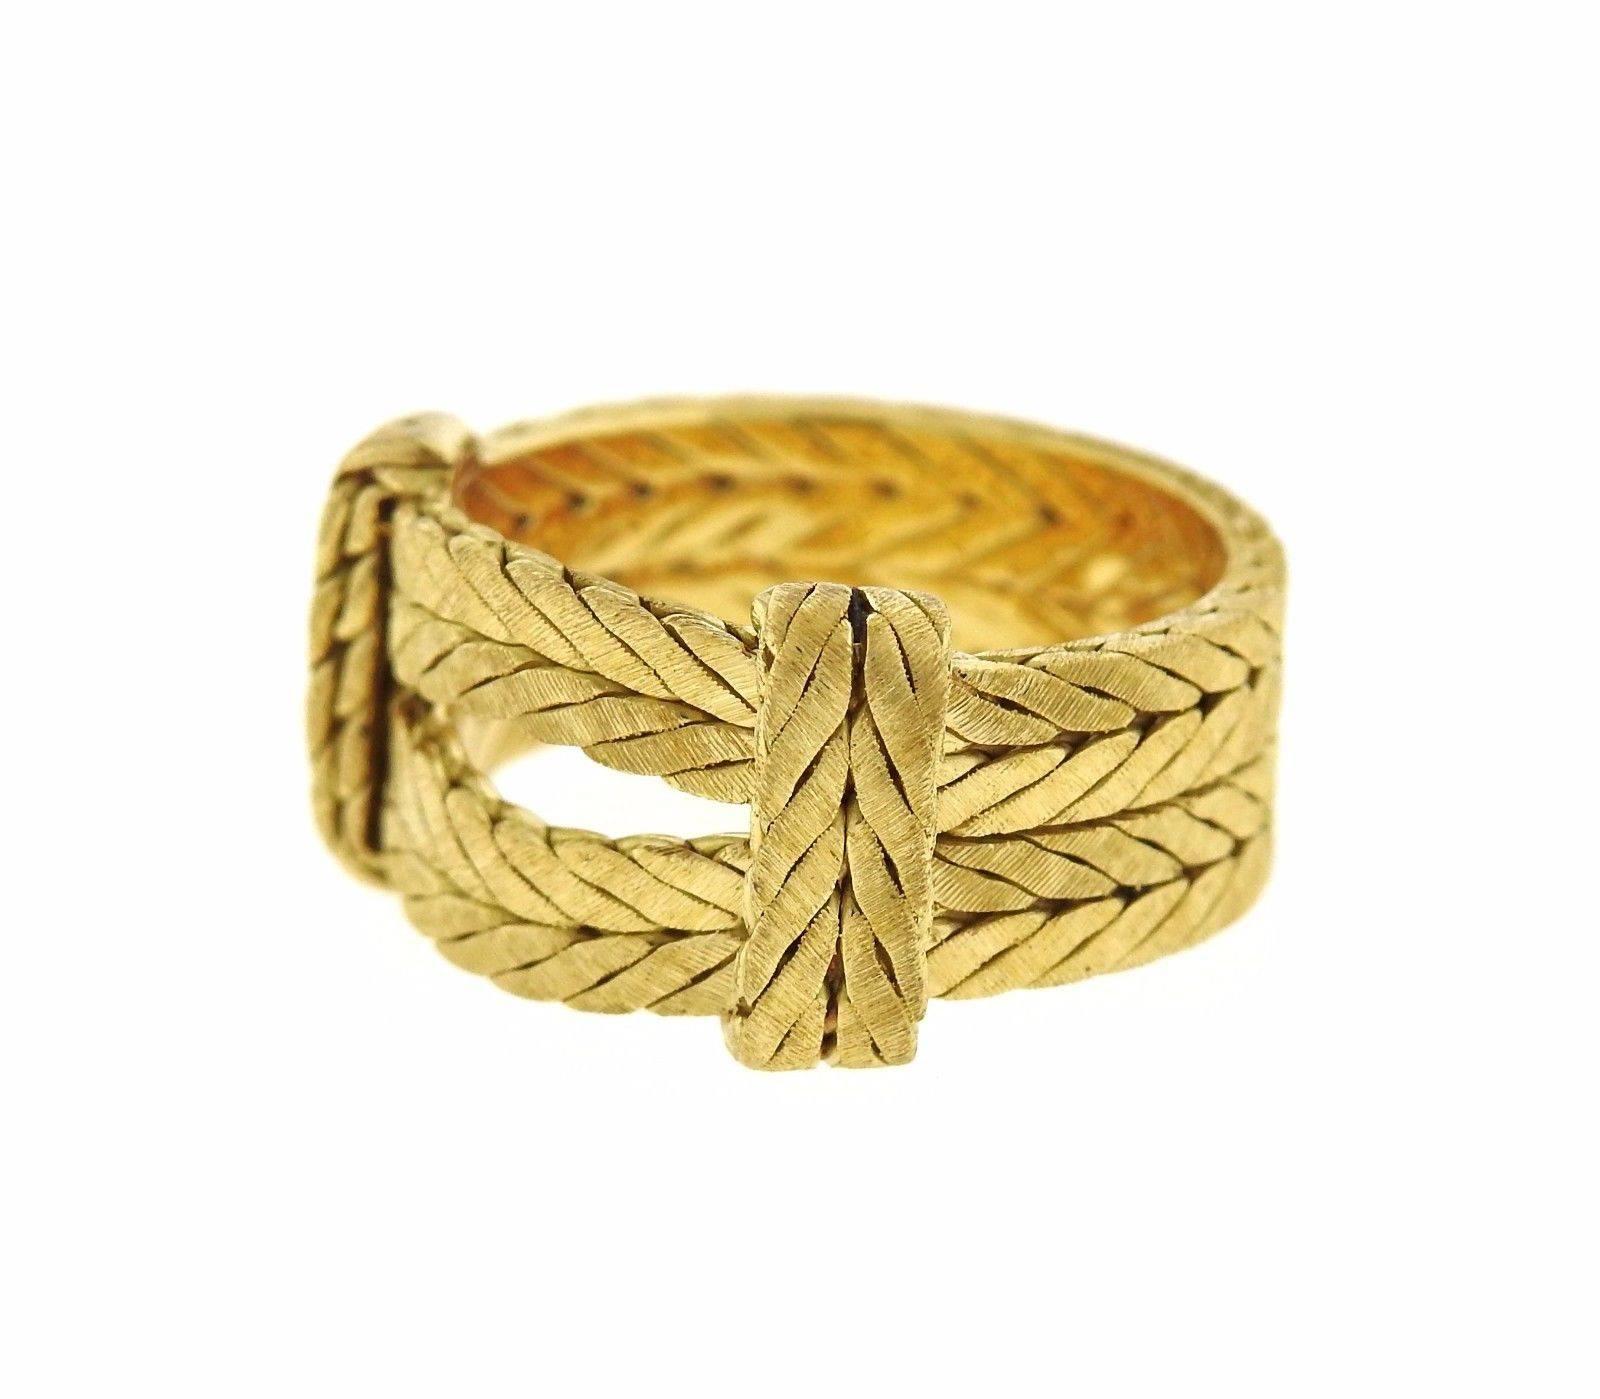 An 18k yellow gold ring by Buccellati.  The ring is a size 6 and is 10mm wide.  The weight of the ring is 8.4 grams.  Marked: Buccellati, 750, Italian mark.  Retail is $4070.